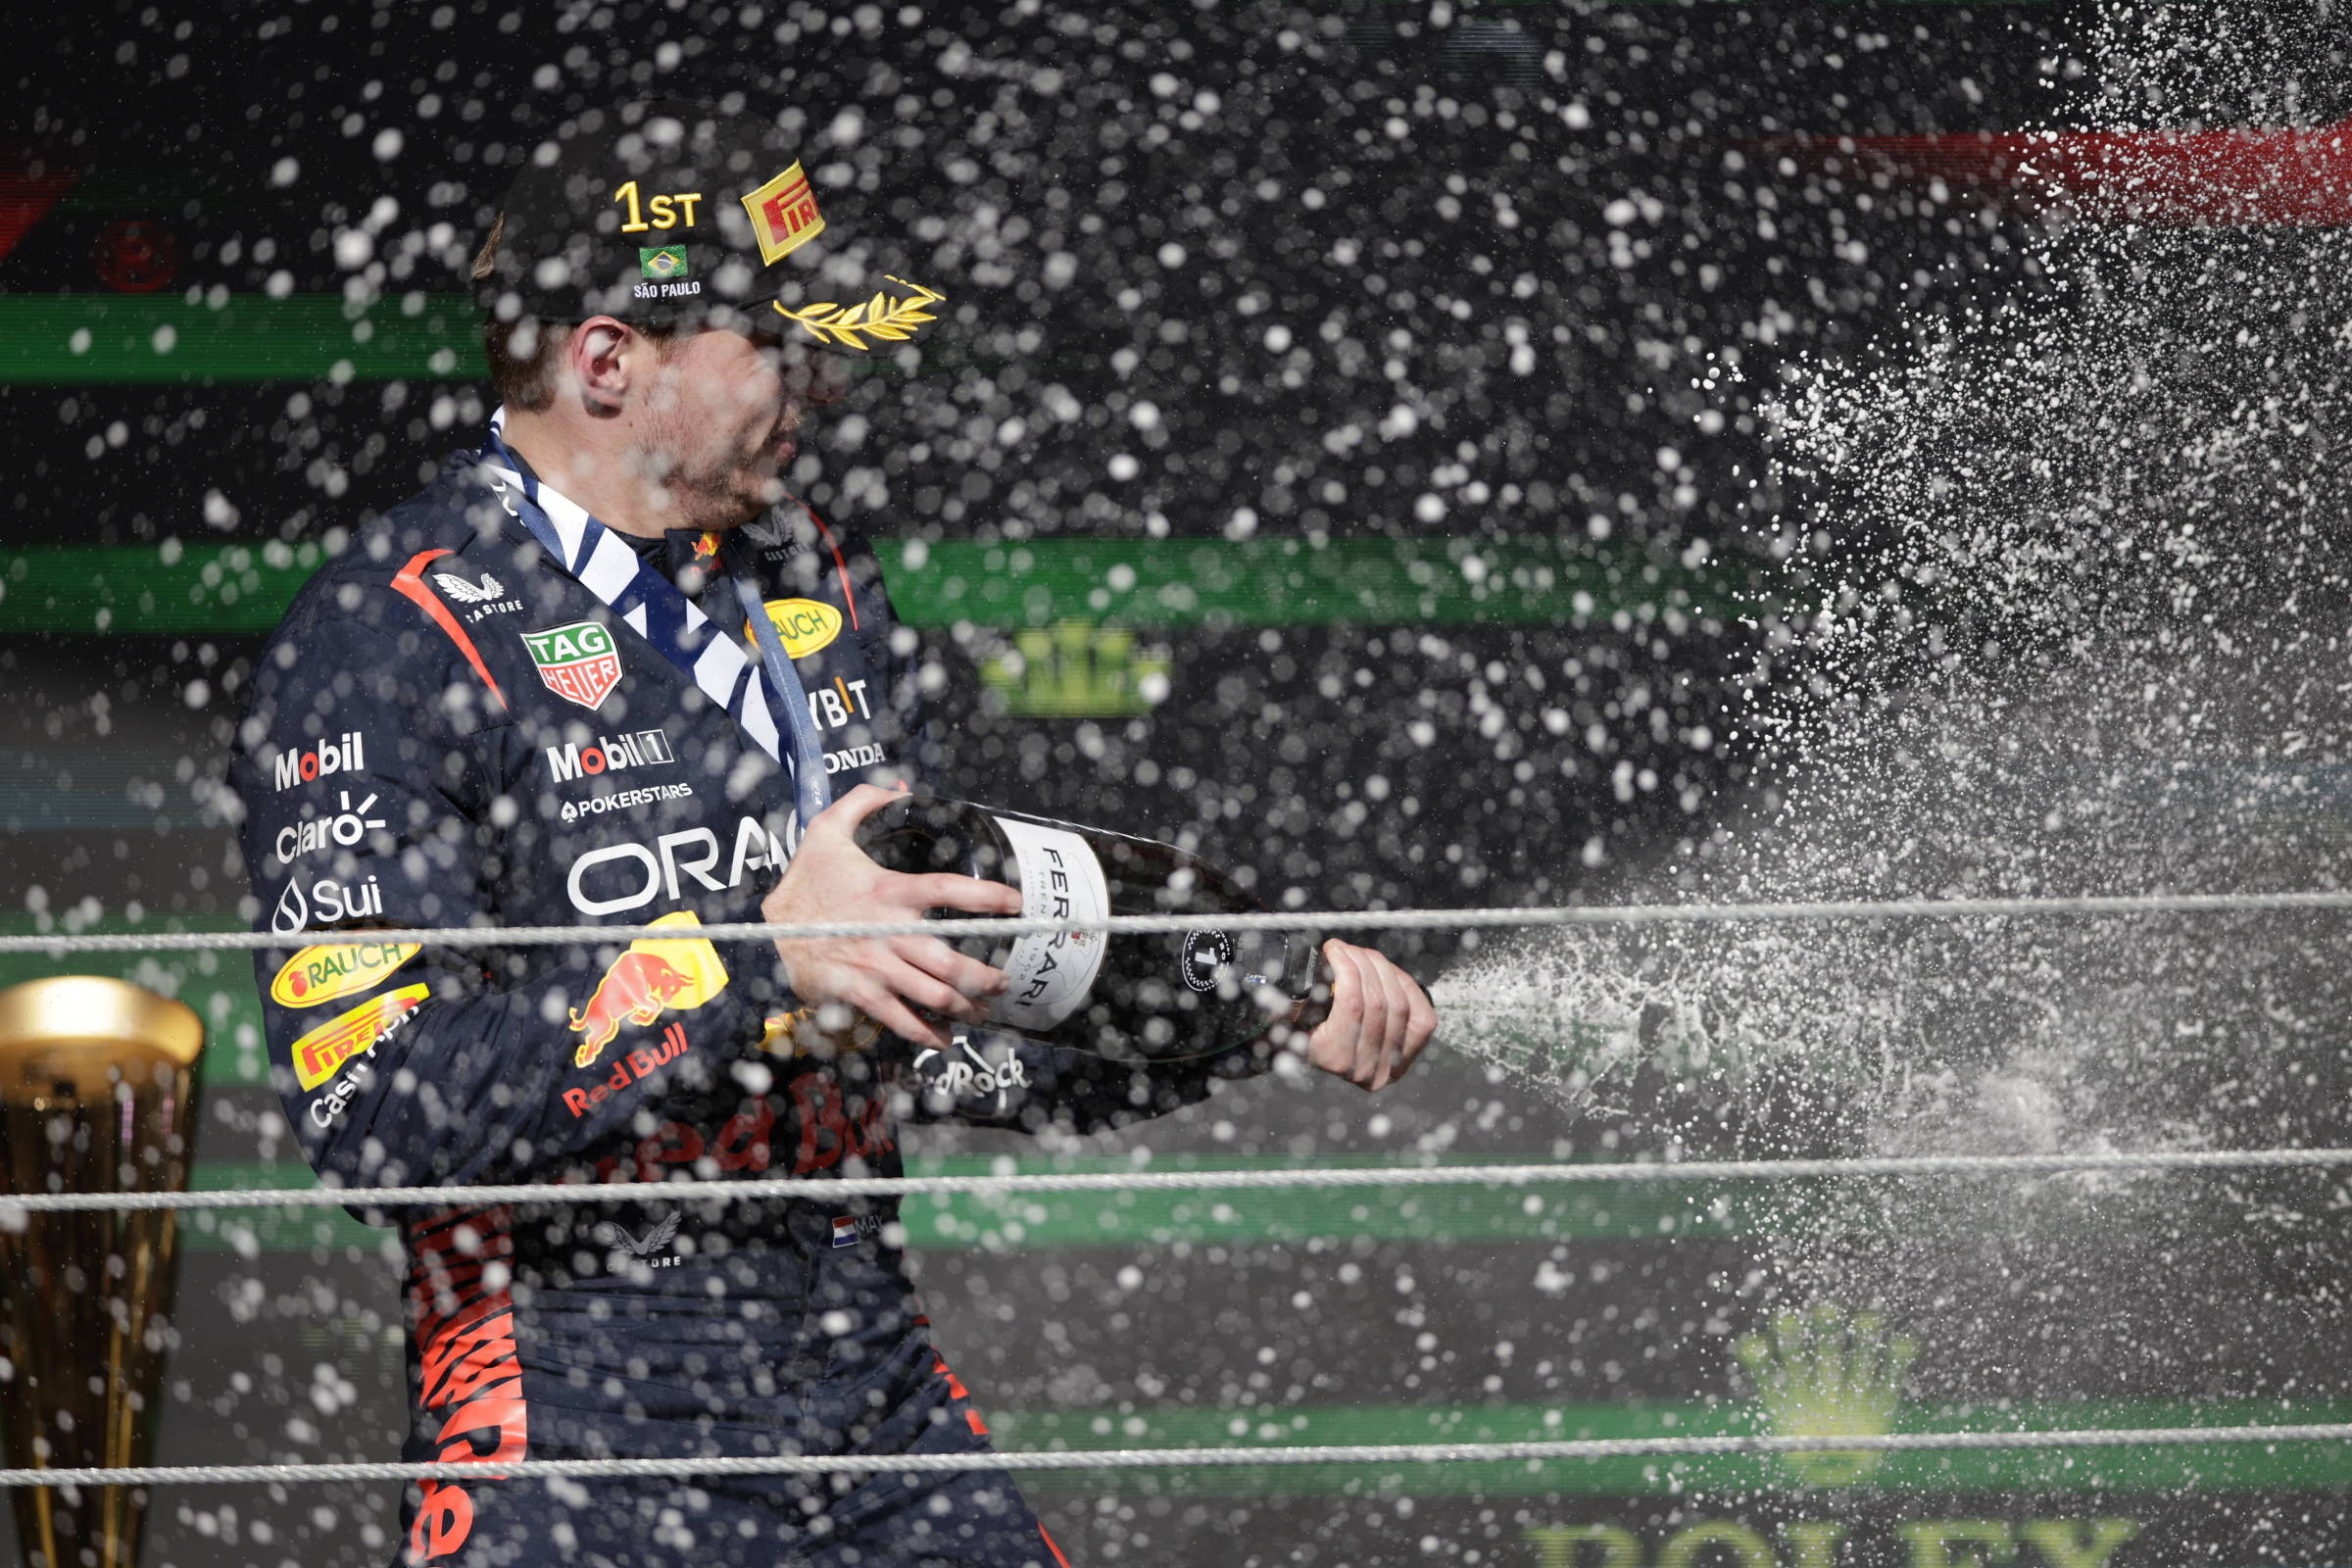 Verstappen wins at Interlagos and establishes greater dominance in F1 history